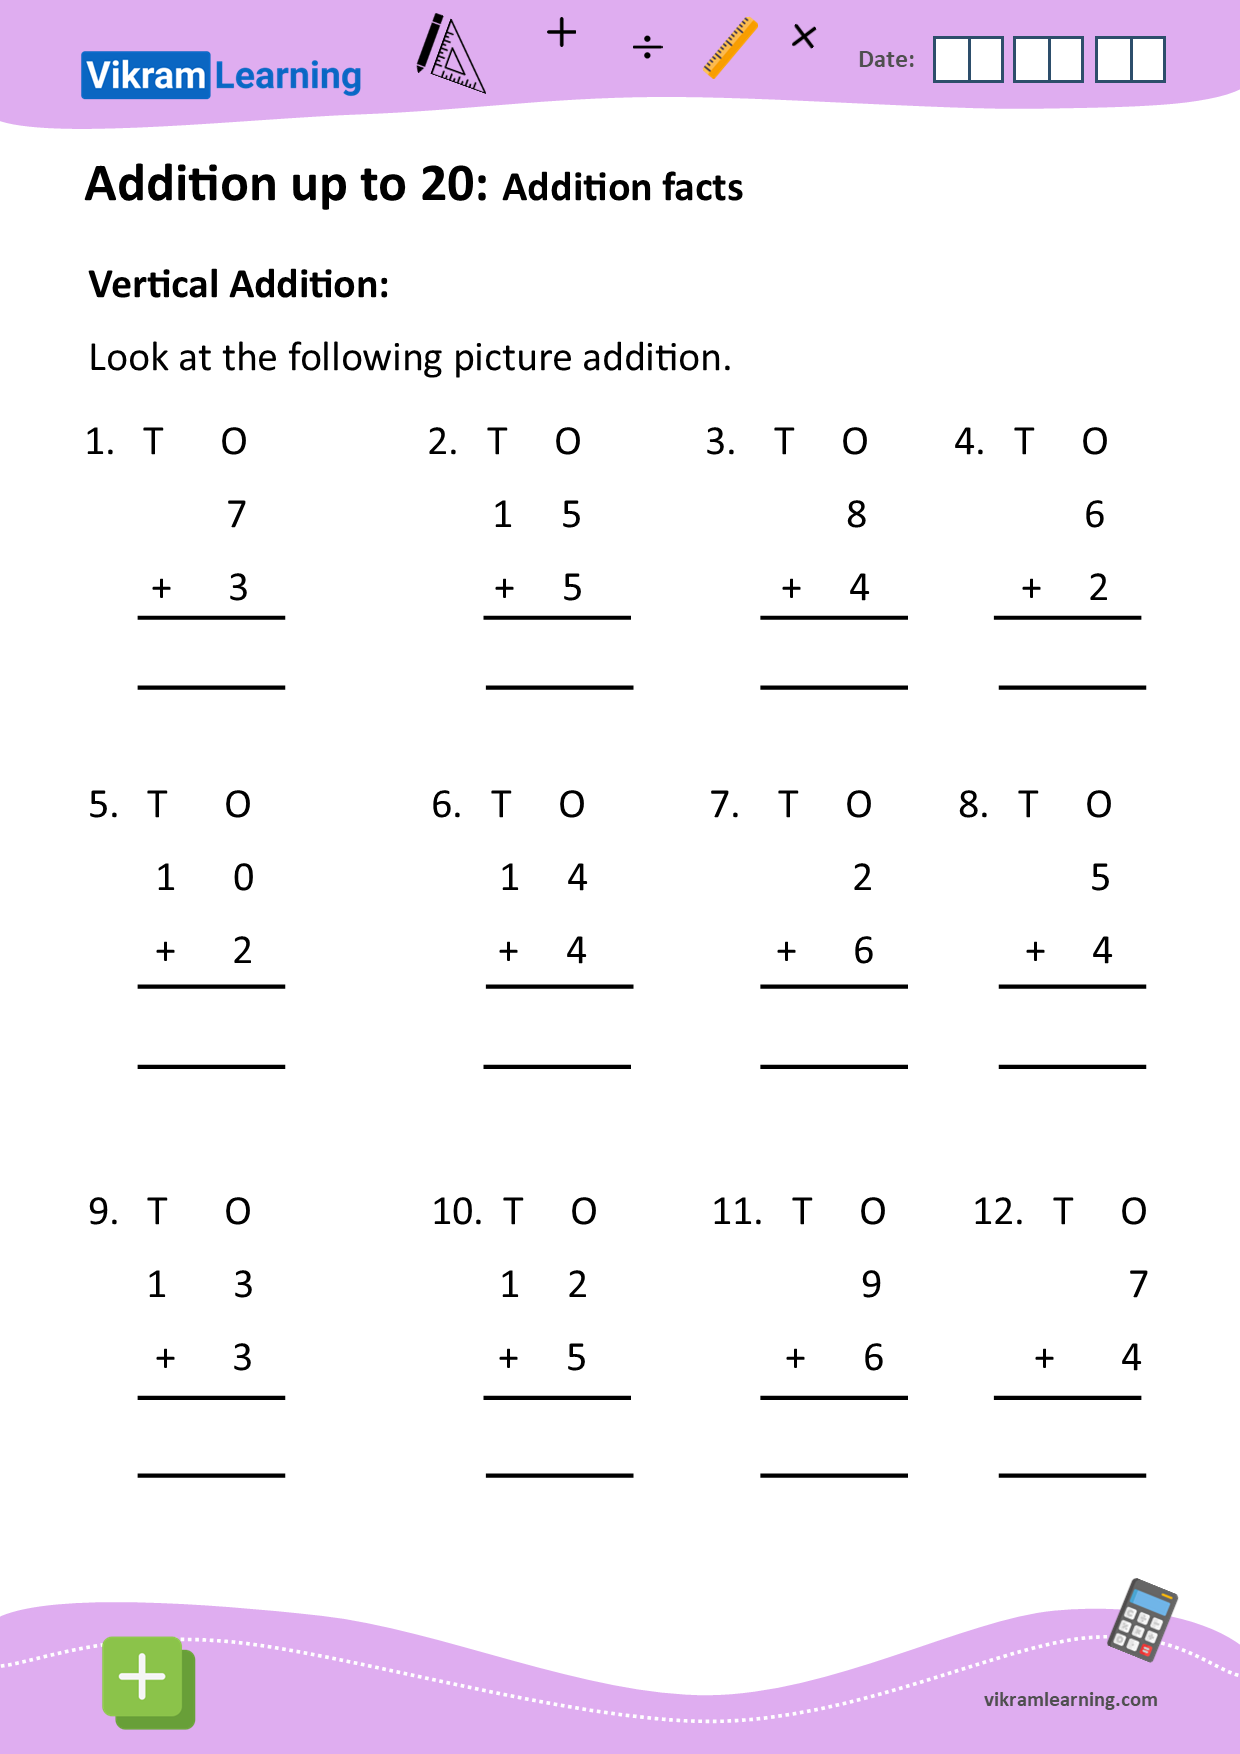 download-addition-up-to-20-using-vertical-addition-worksheets